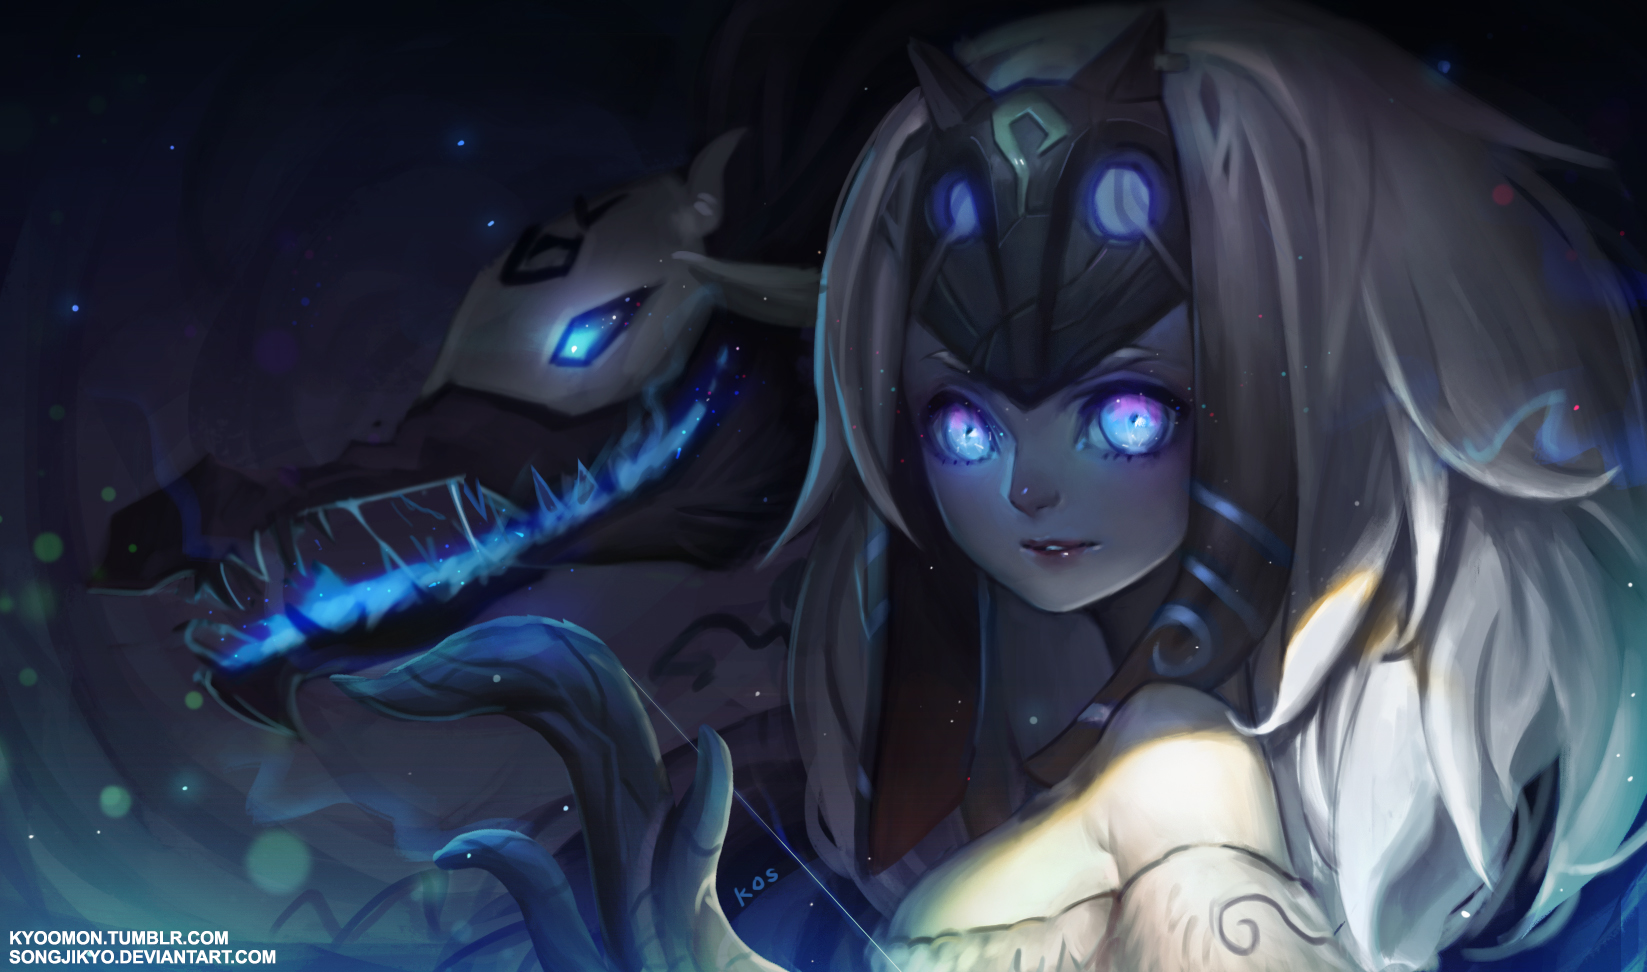 Kindred community creations